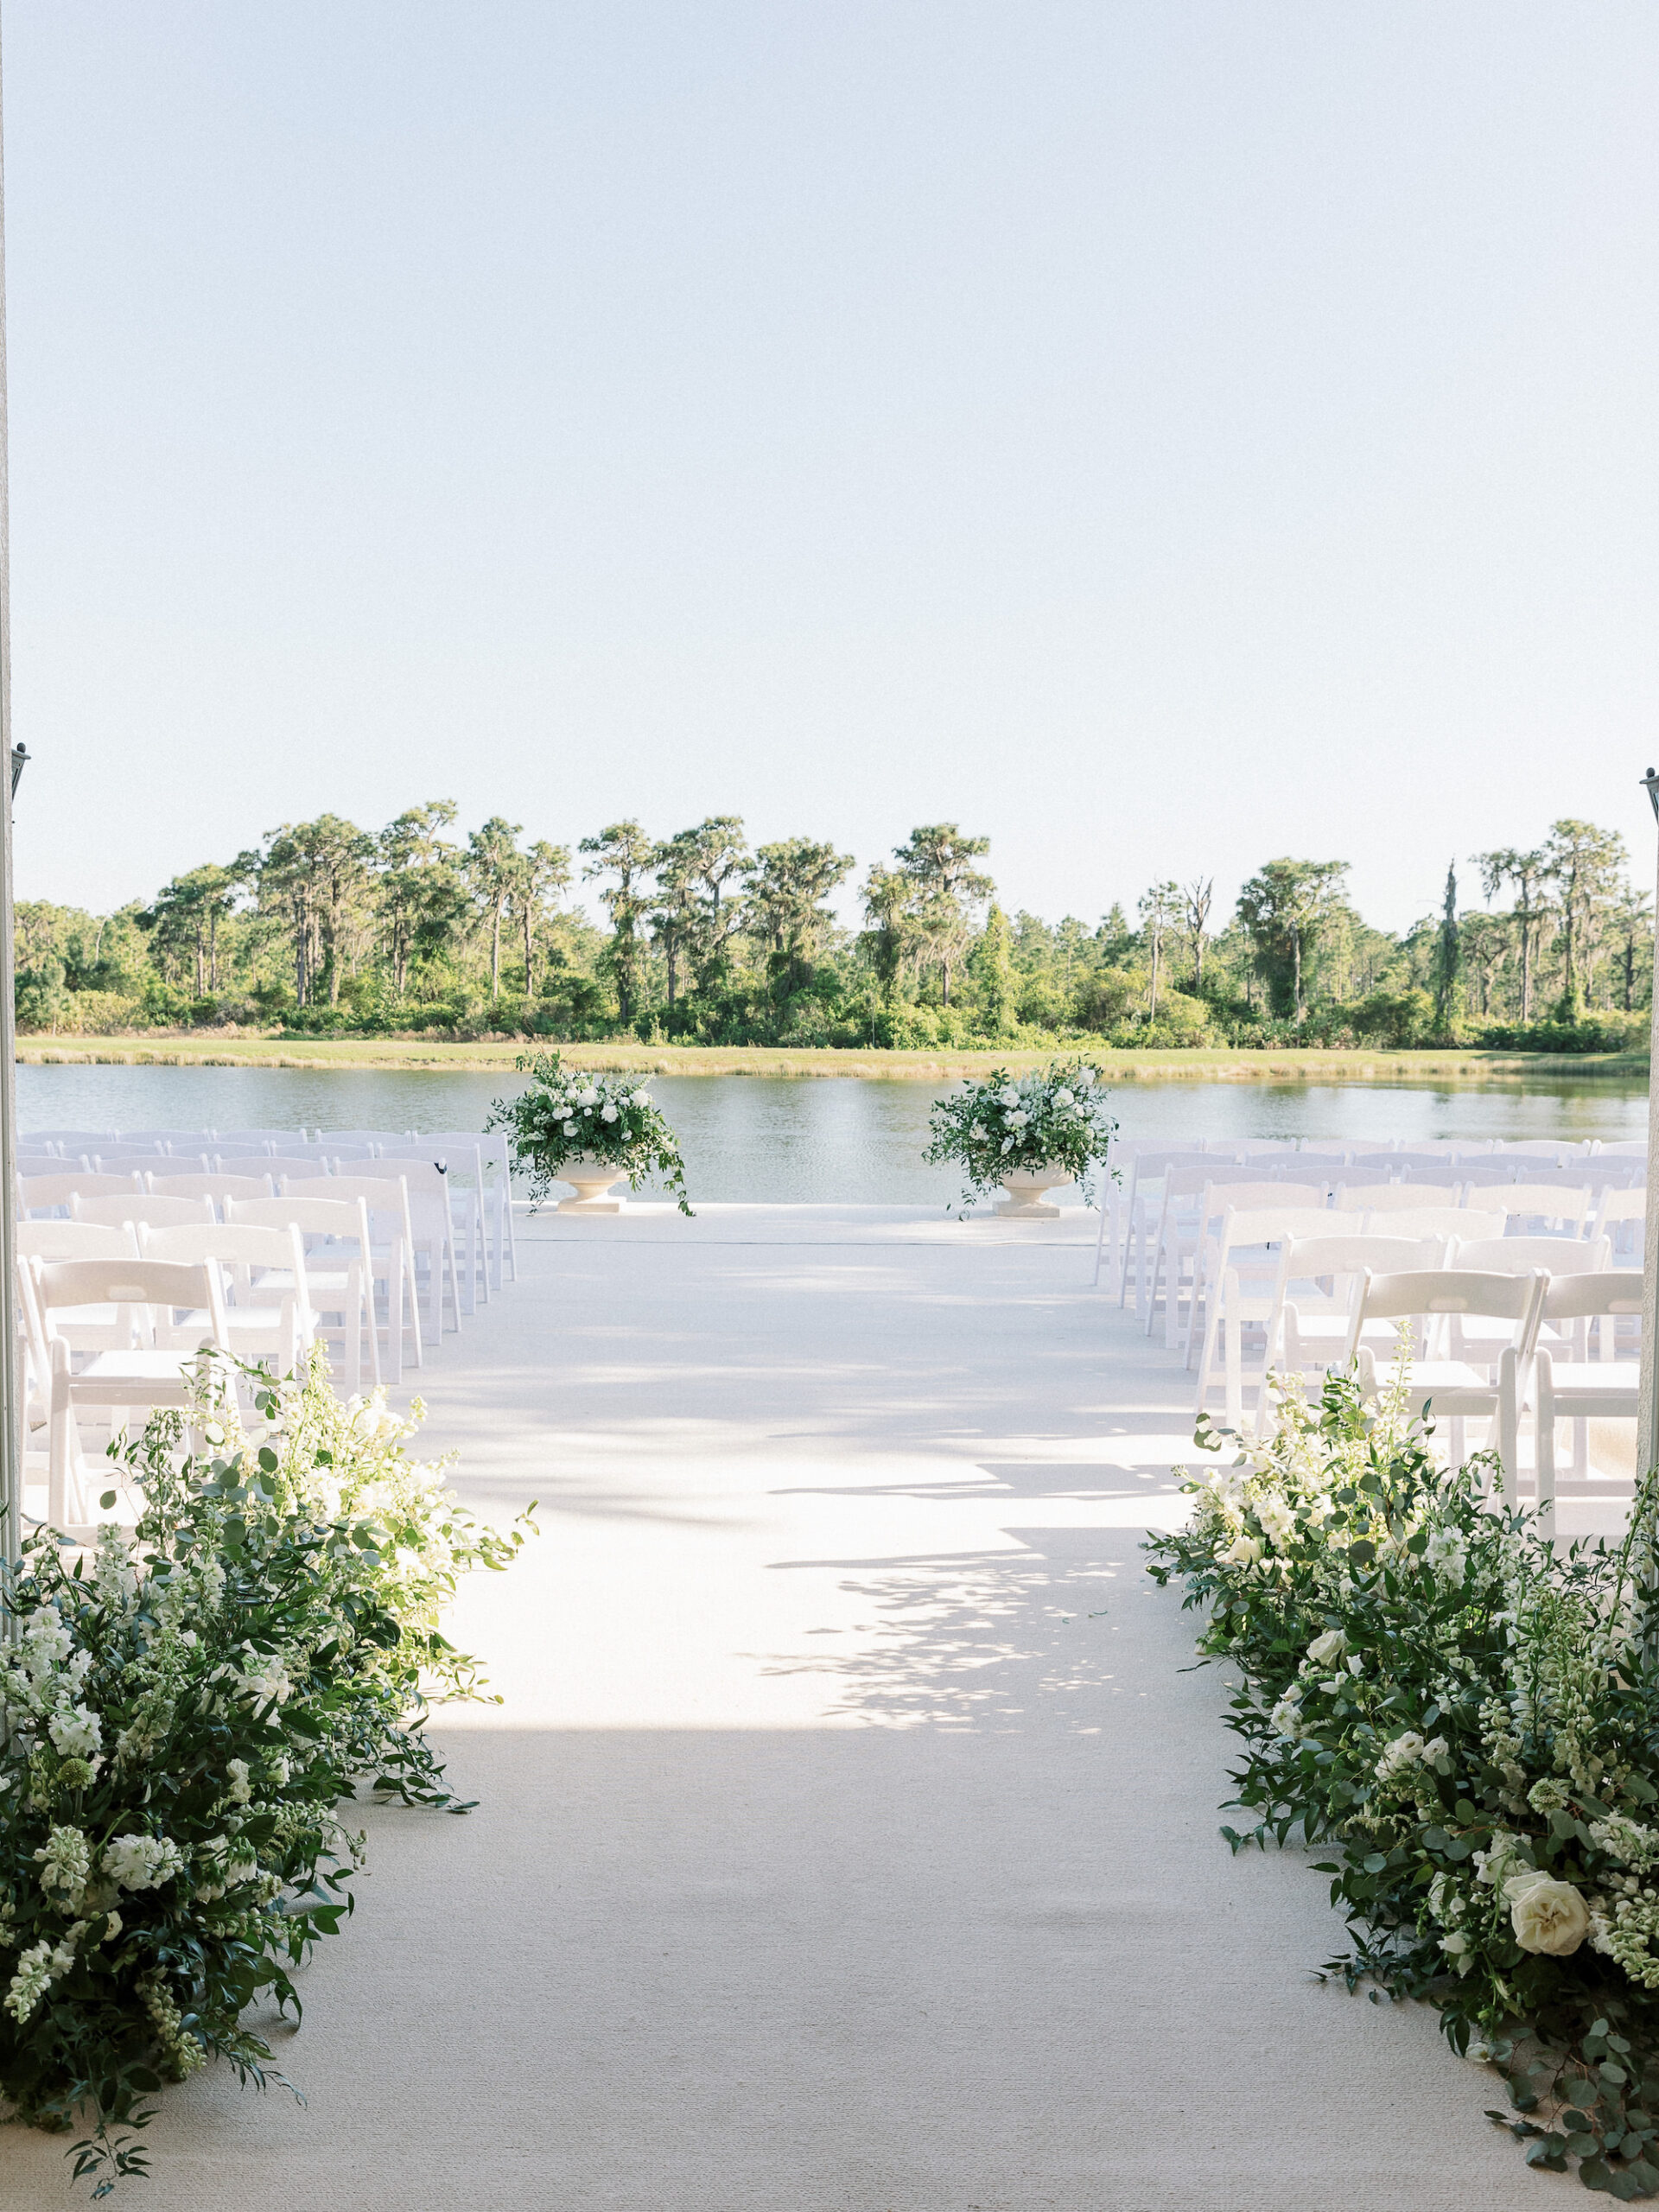 Old Florida Elegant Outdoor Waterfront Wedding Ceremony, Greenery and White Roses Floral Arrangements | Tampa Bay Wedding Venue Concession Golf Club